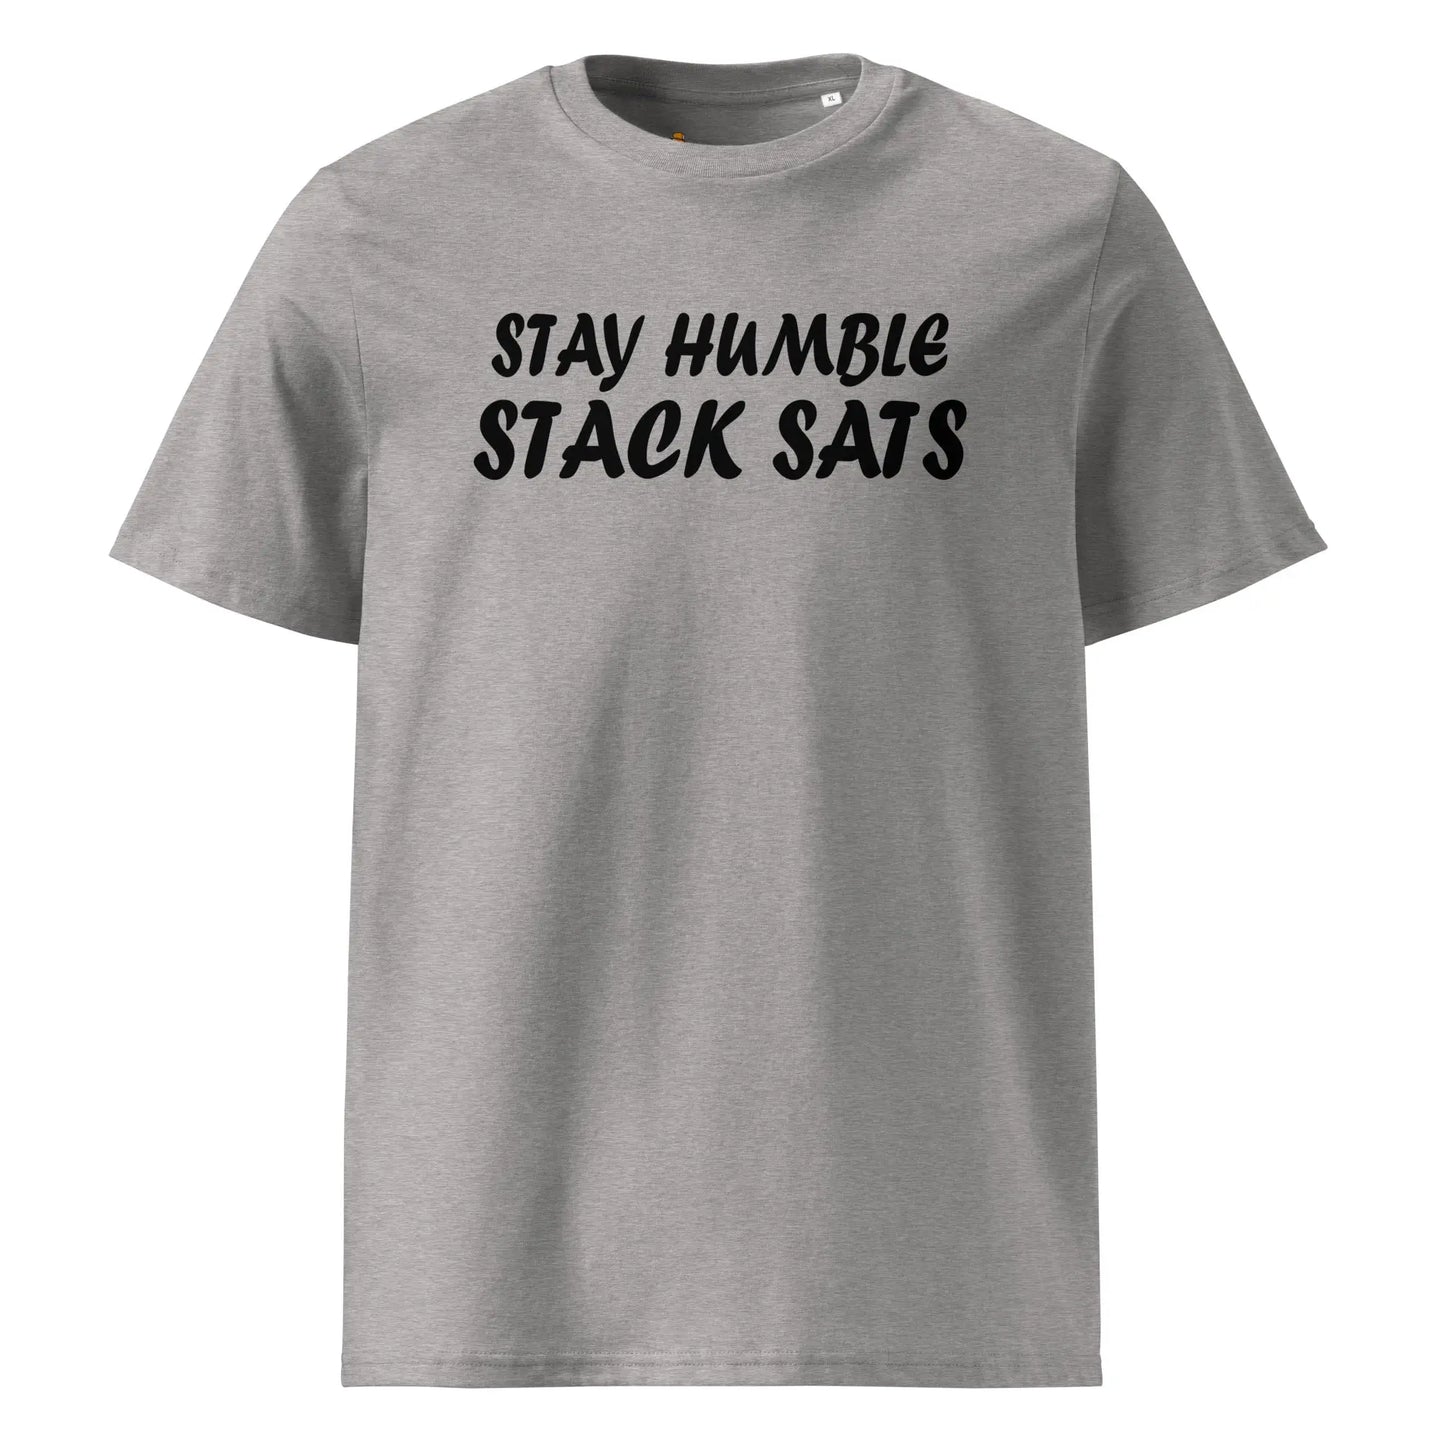 Stay Humble Stack Sats - Premium Unisex Organic Cotton Bitcoin T-shirt Store of Value